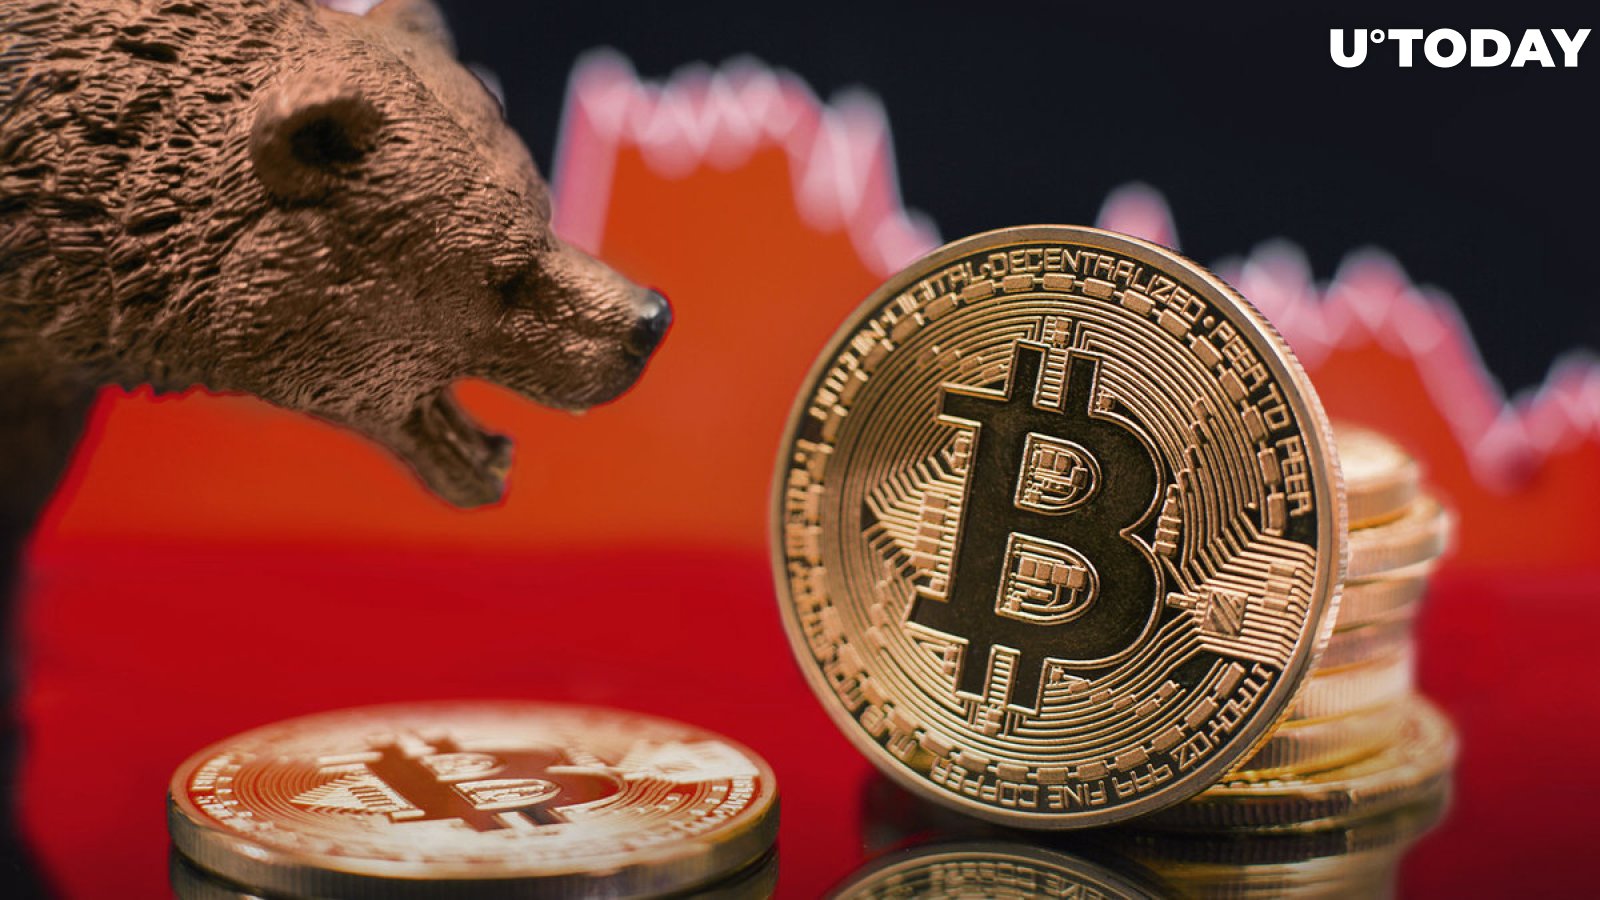 Bitcoin (BTC) Price Collapsing Again After Short-Lived Recovery